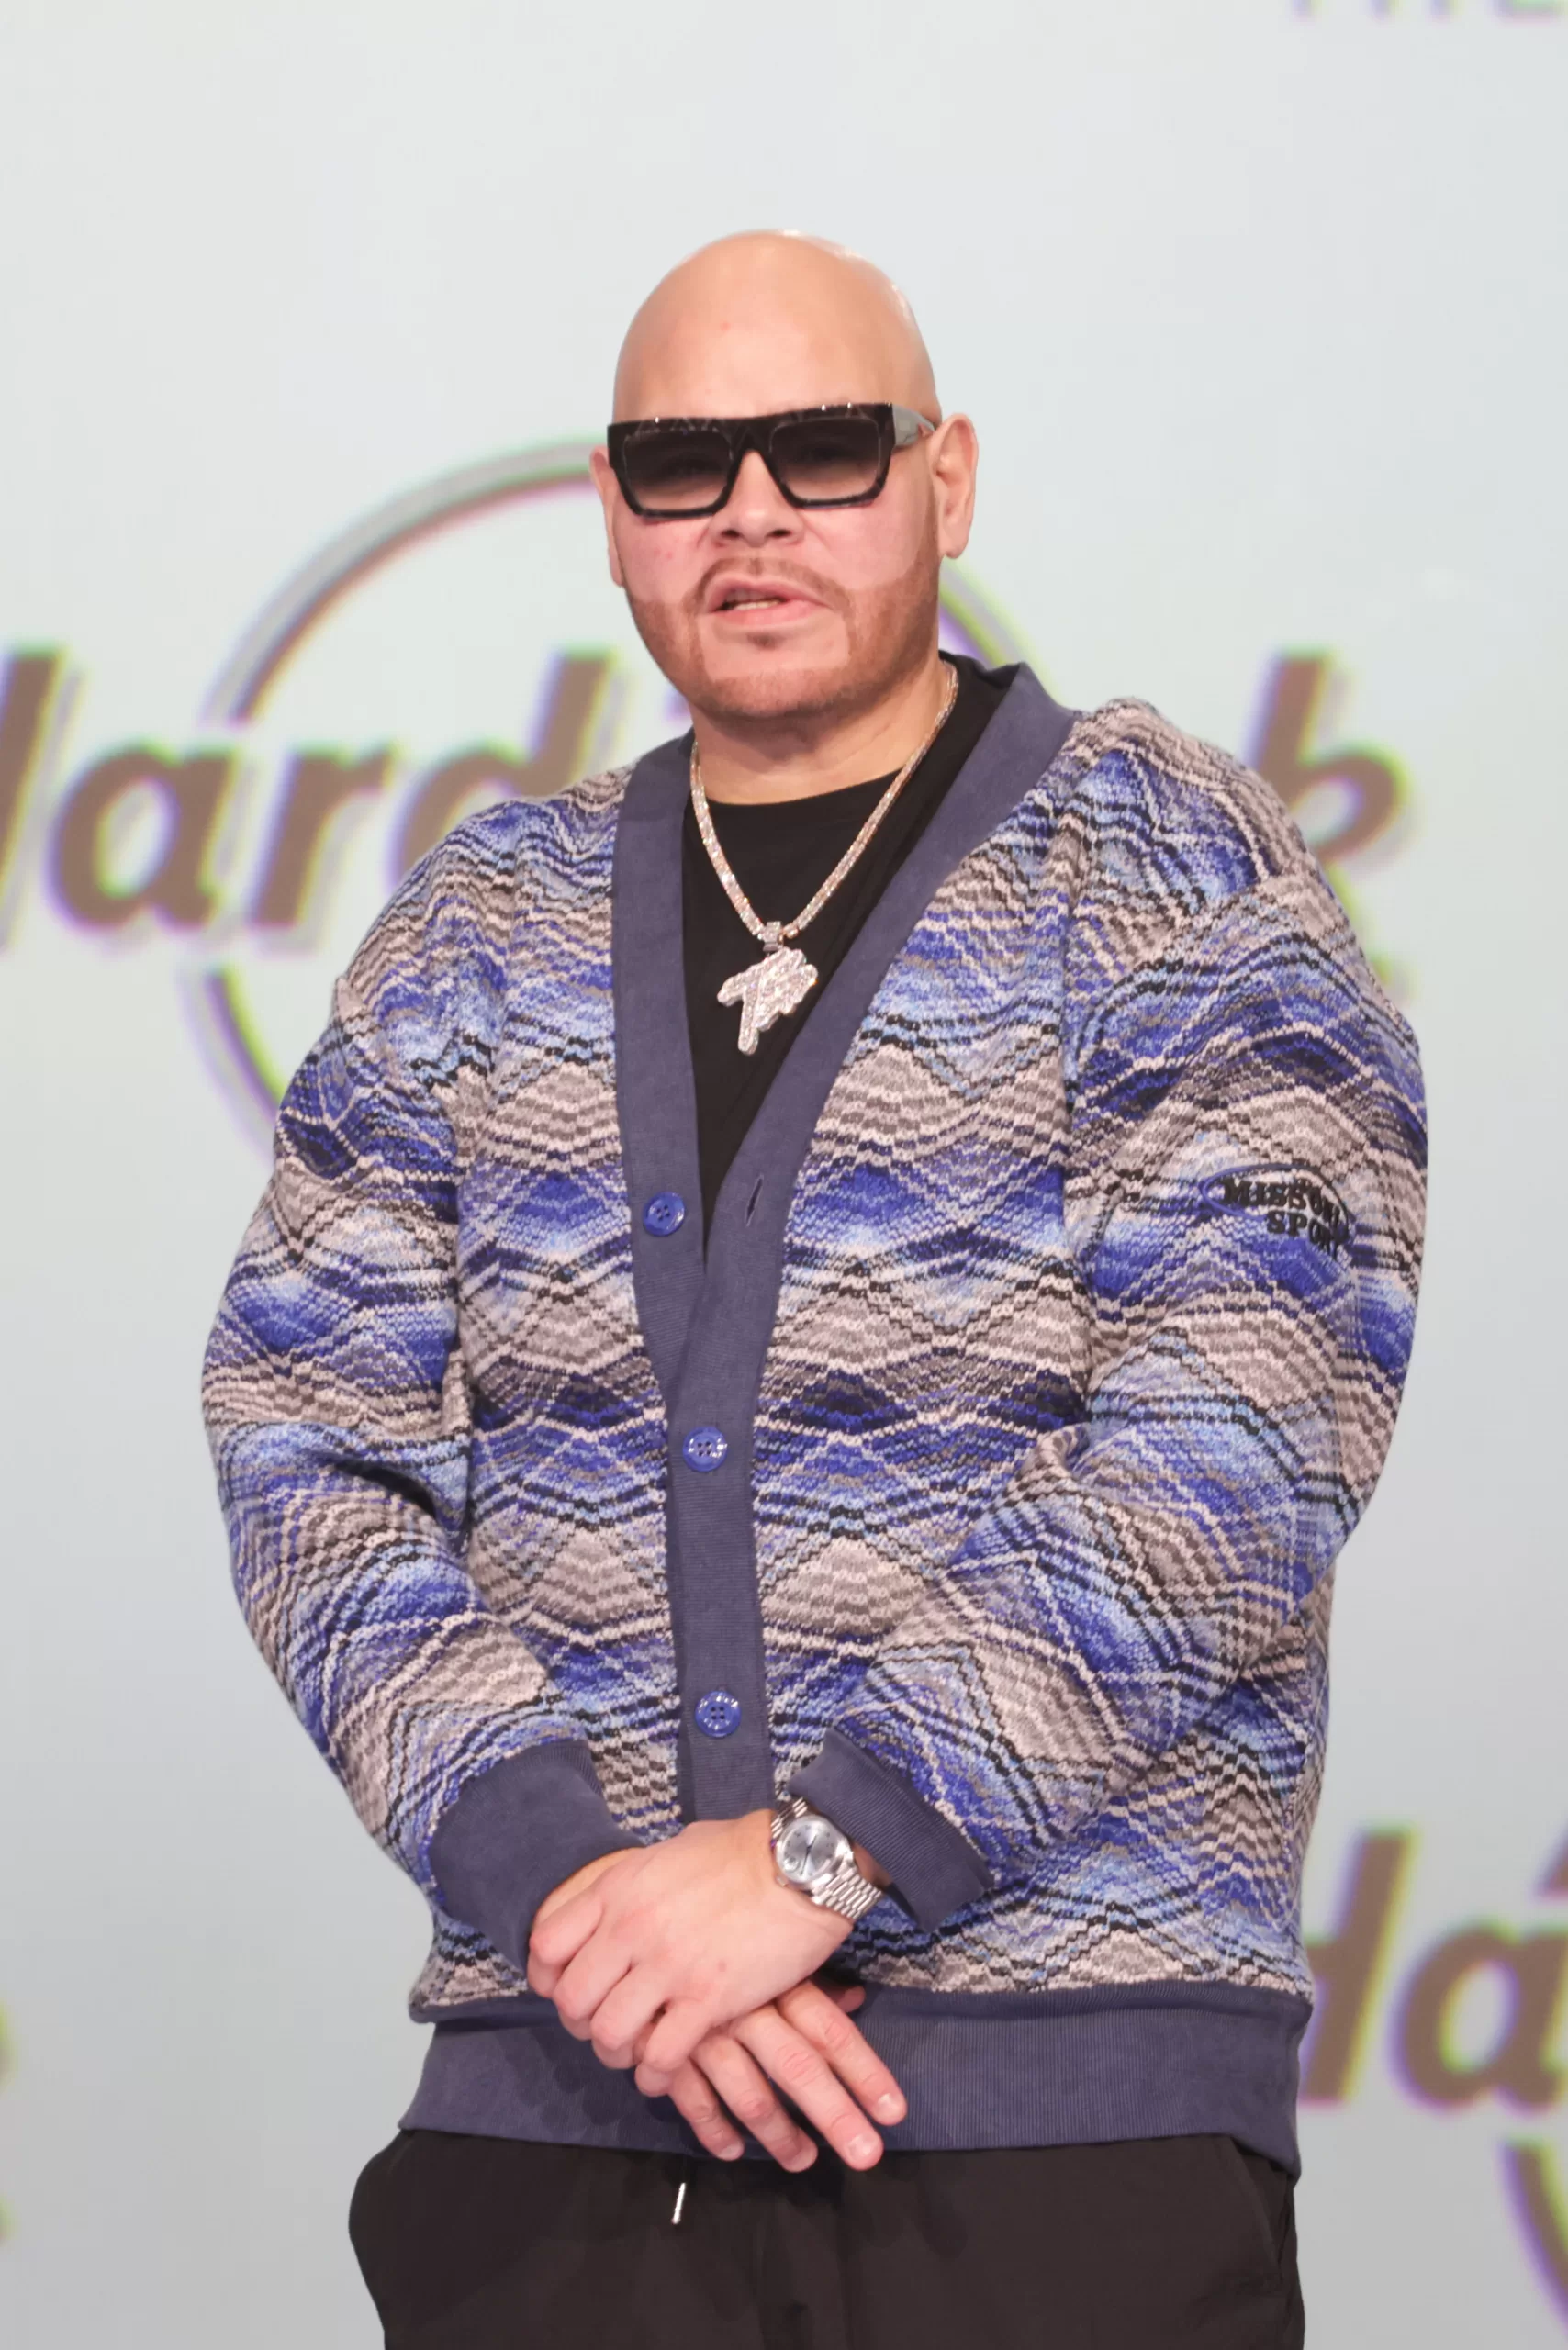 Fat Joe Net Worth: A Rapper And Producer's Journey From D.I.T.C Crew To Thriving Solo Career